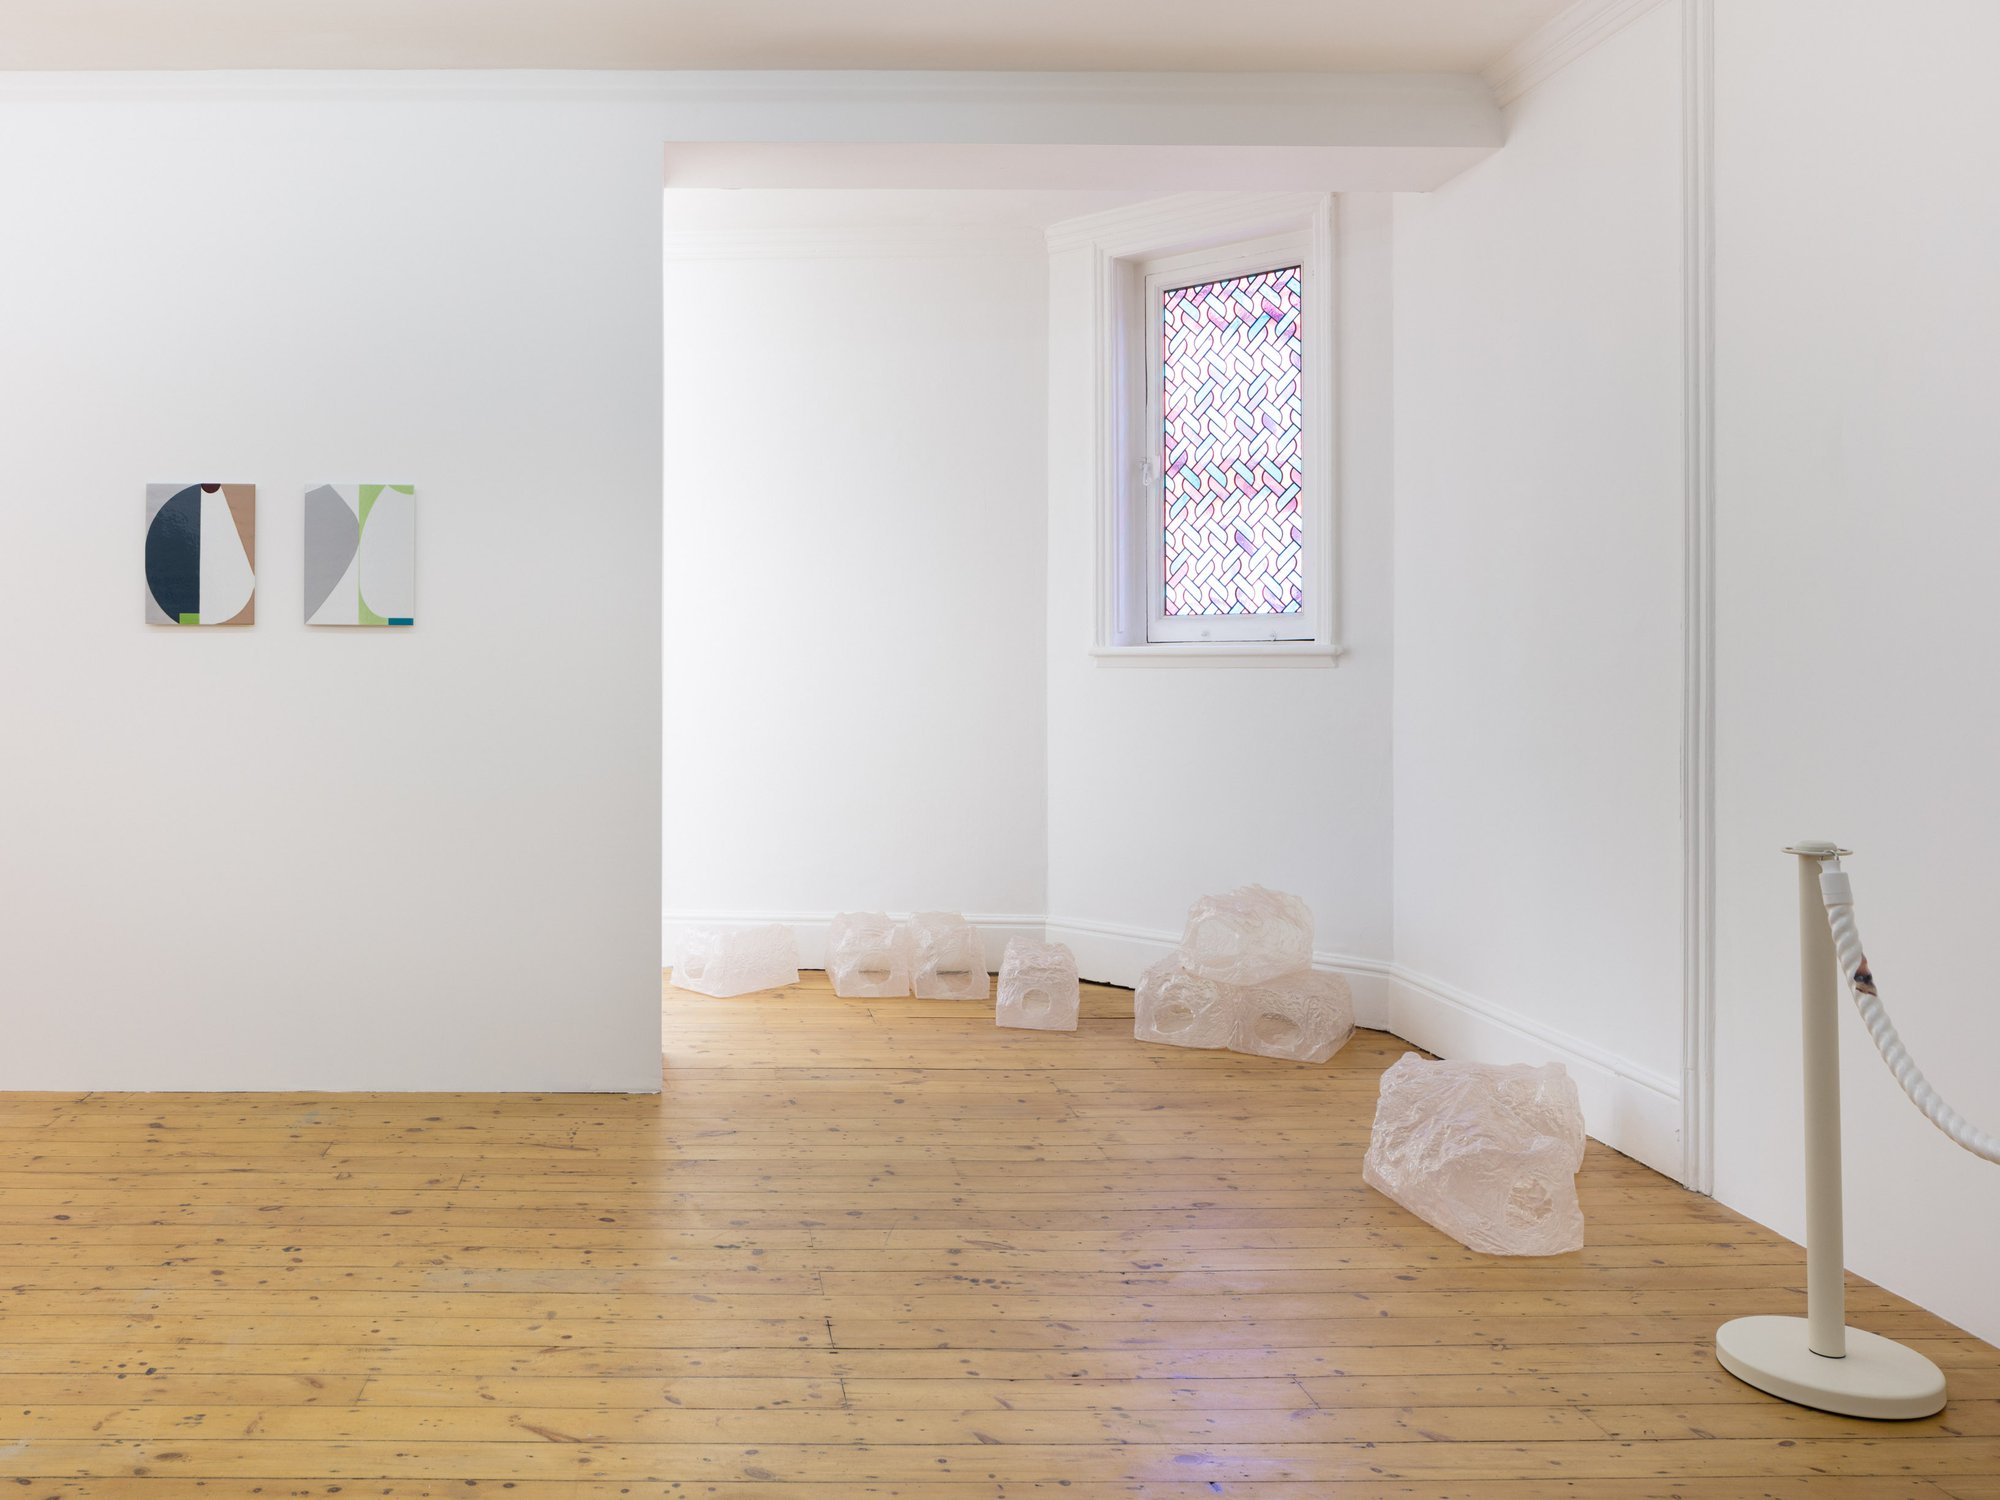 Installation view, WE, Rodeo, London, 2018.